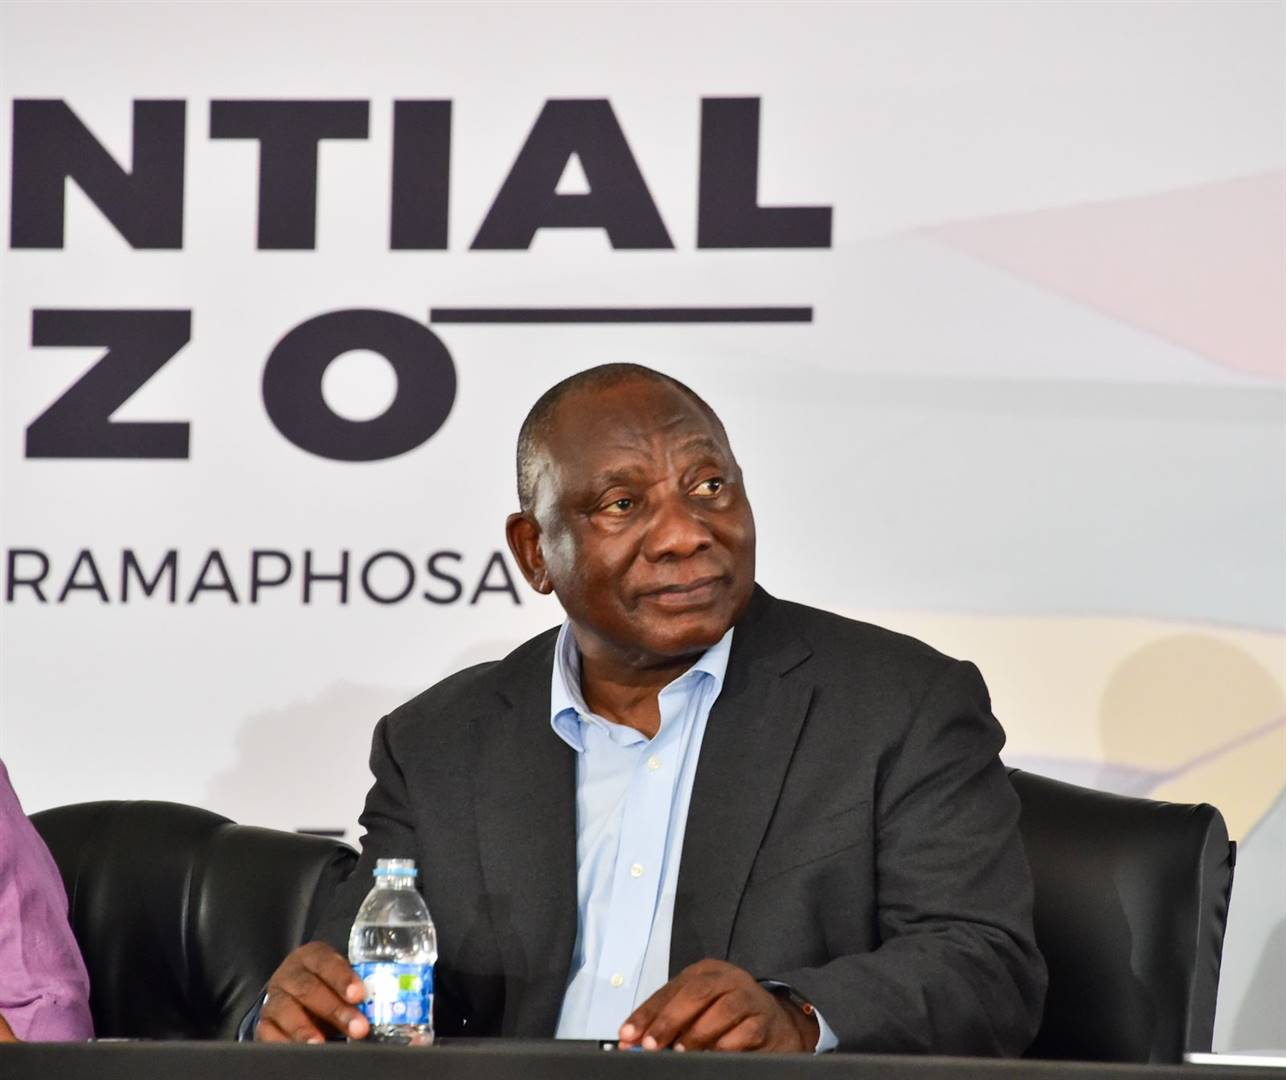 President Cyril Ramaphosa has issued a warning ahead of the general elections on 29 May. Photo by GCIS